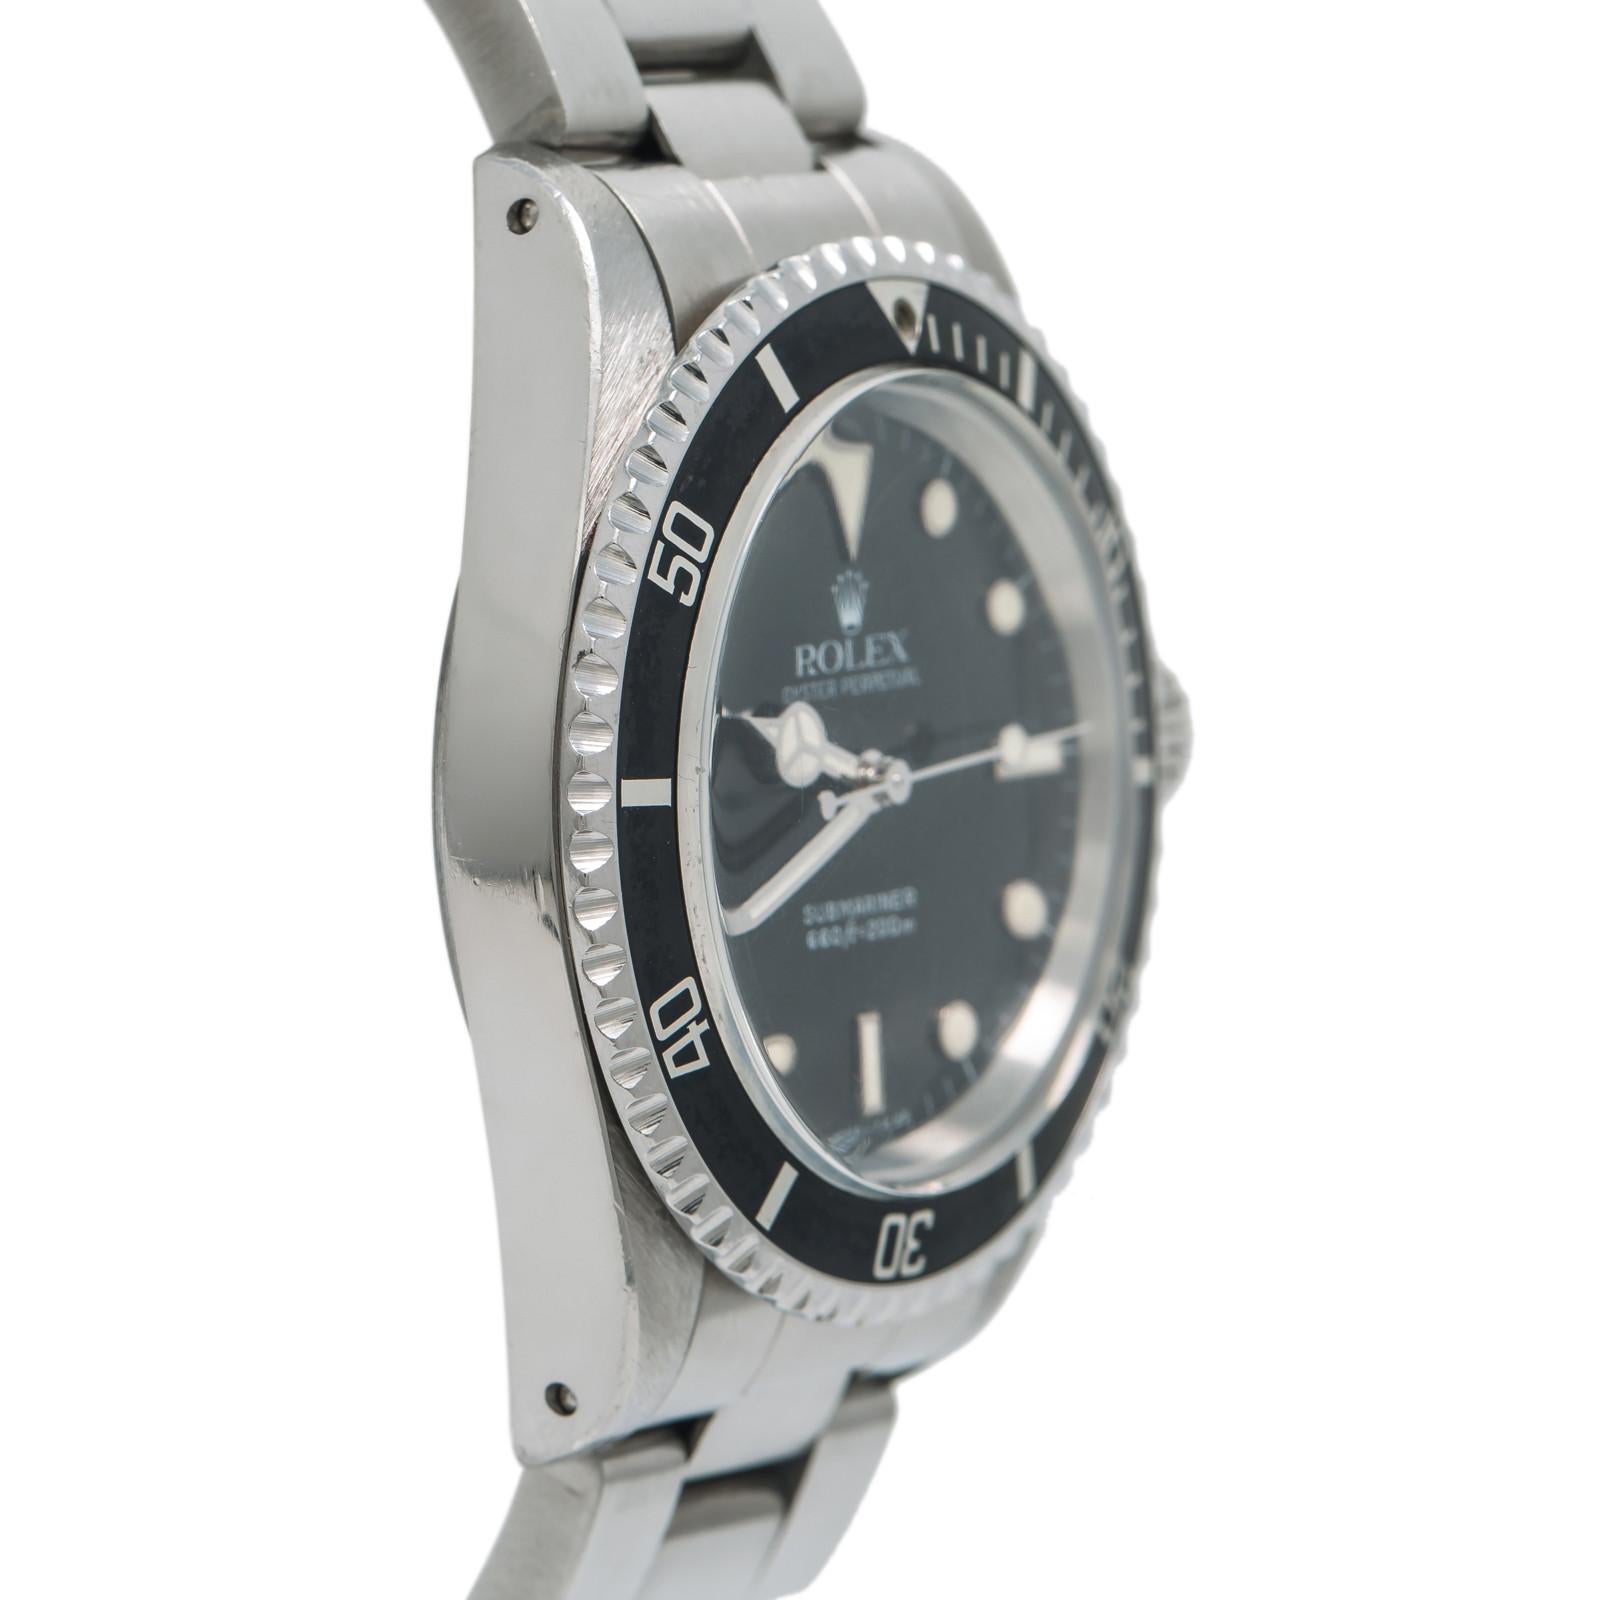 Rolex Submariner 5513, Black Dial, Certified and Warranty In Good Condition For Sale In Miami, FL